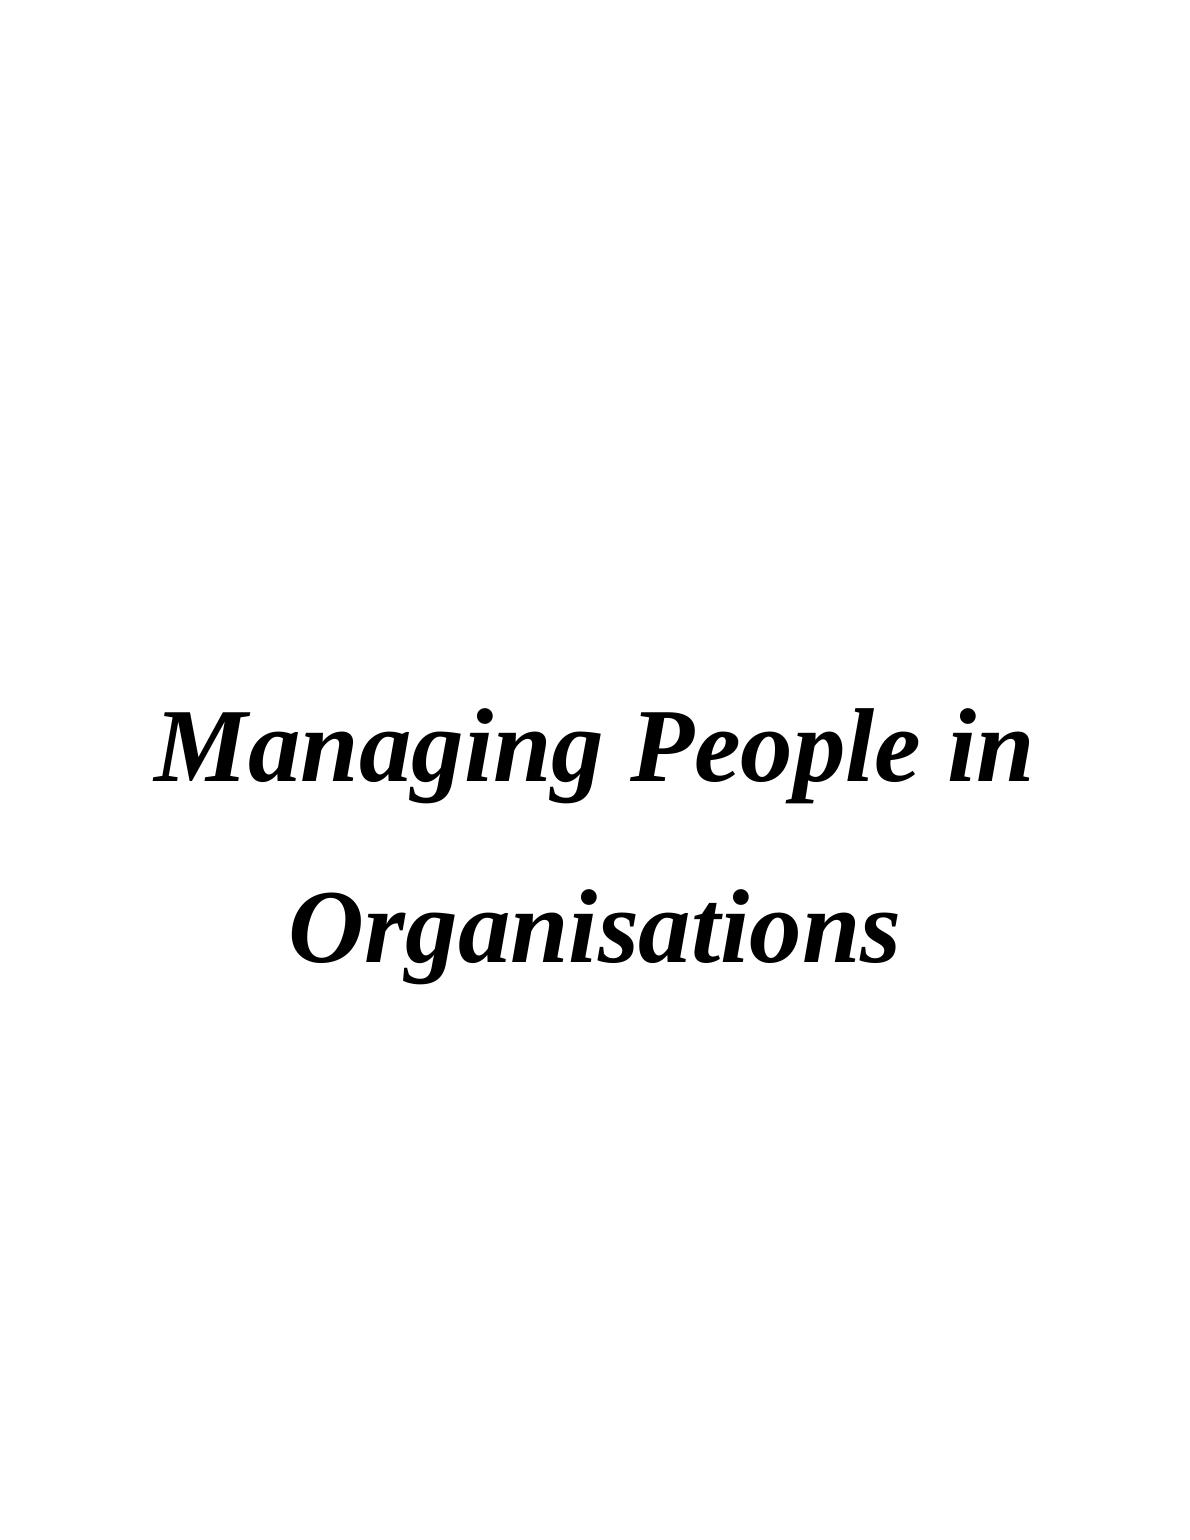 Managing People in Organisations INTRODUCTION_1